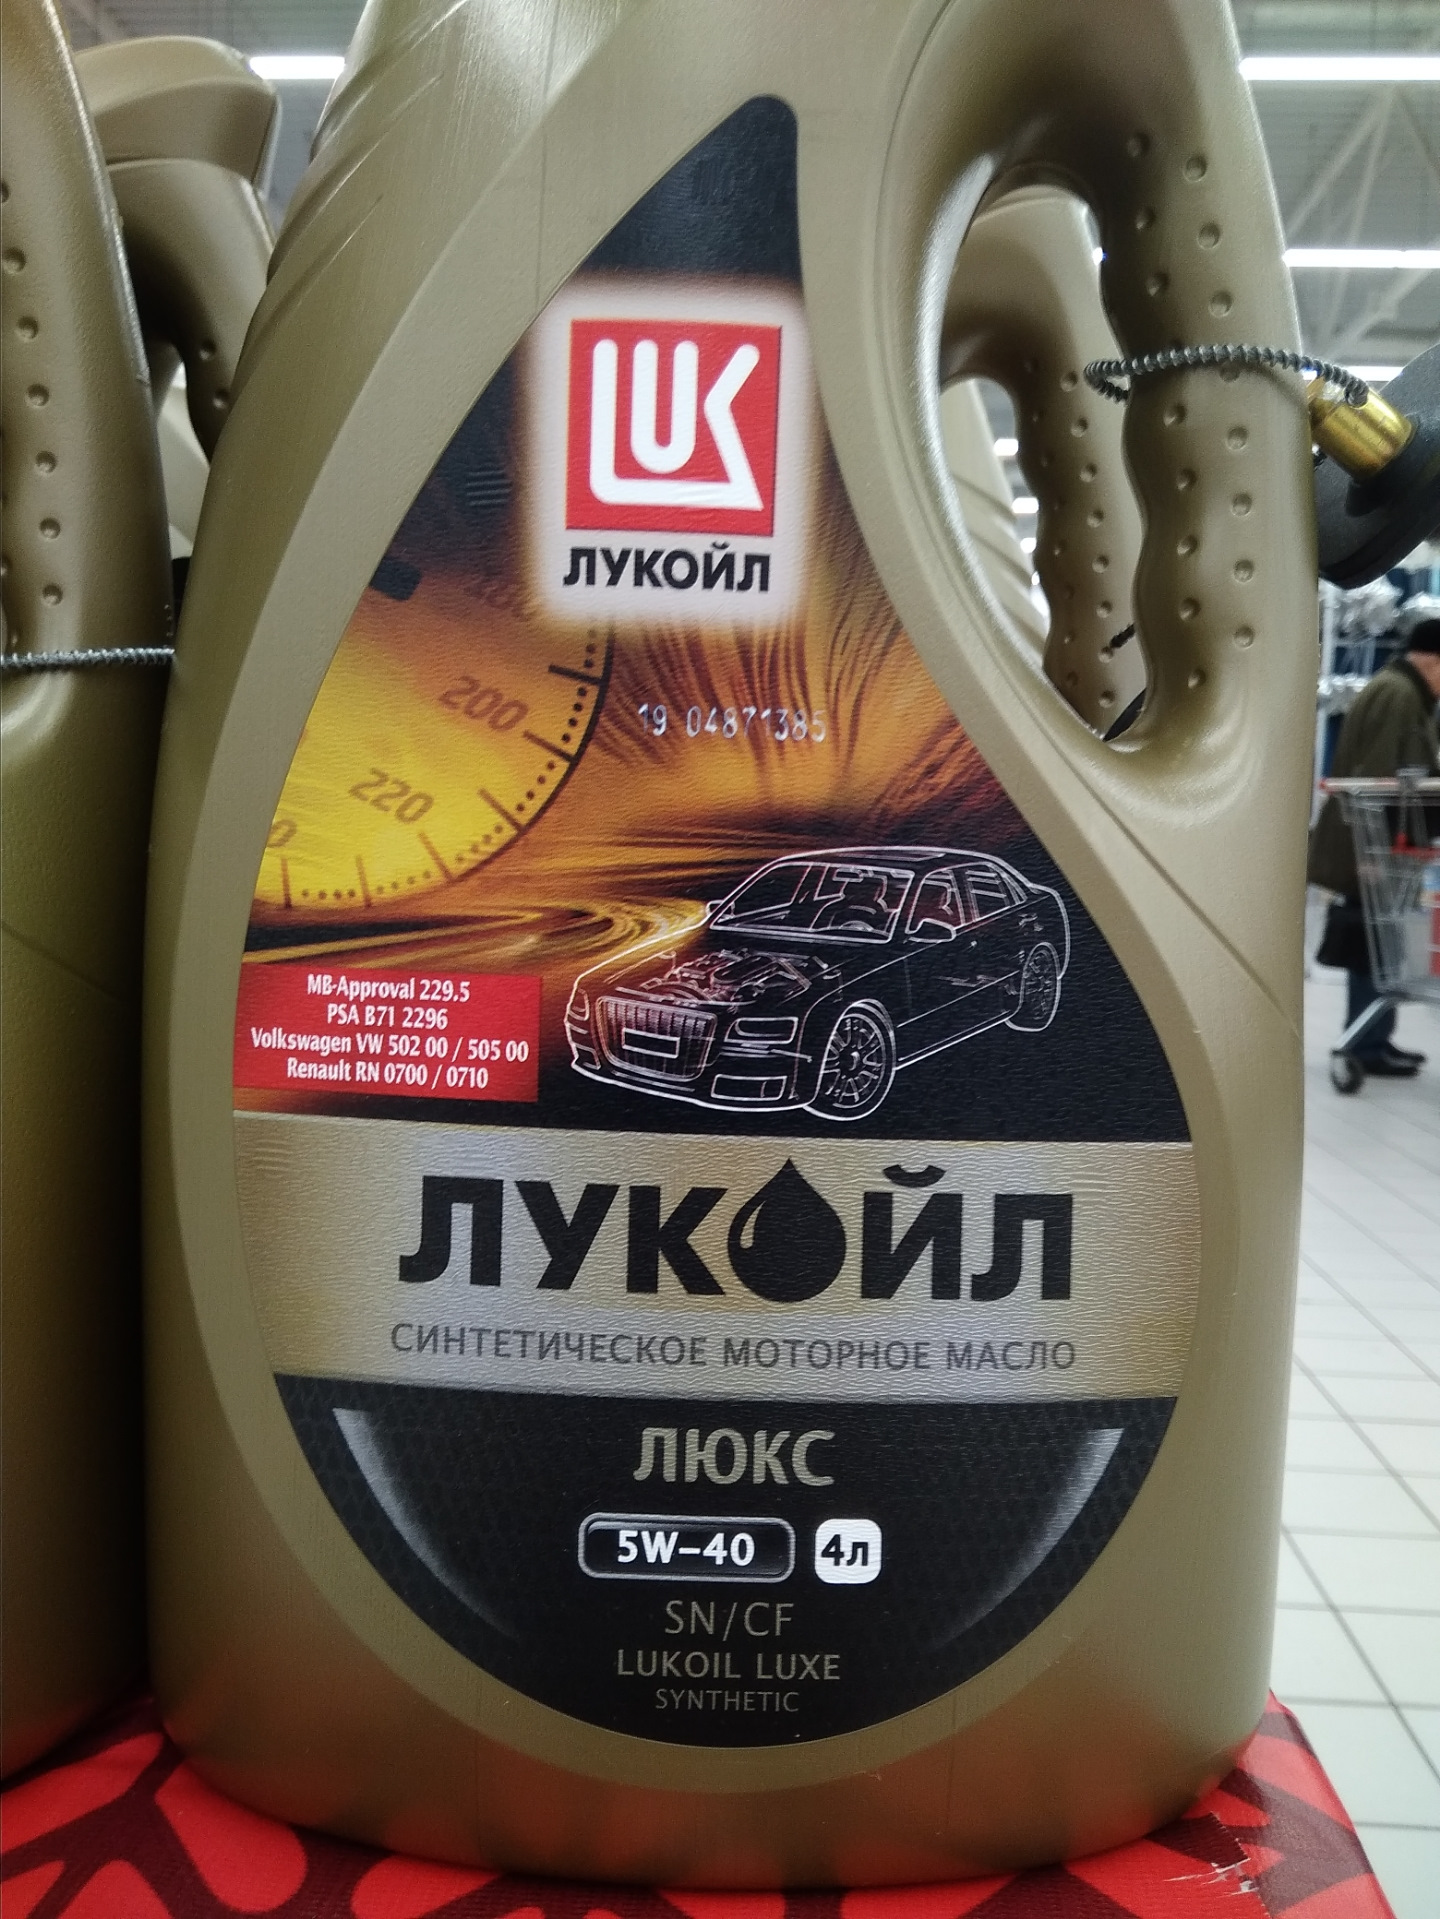 Масло моторное Лукойл Люкс на Рено Дастер 2.0. Рено Логан 1 1.6 Lukoil Luxe. Масло Renault rn0700. Какое моторное масло в дастер